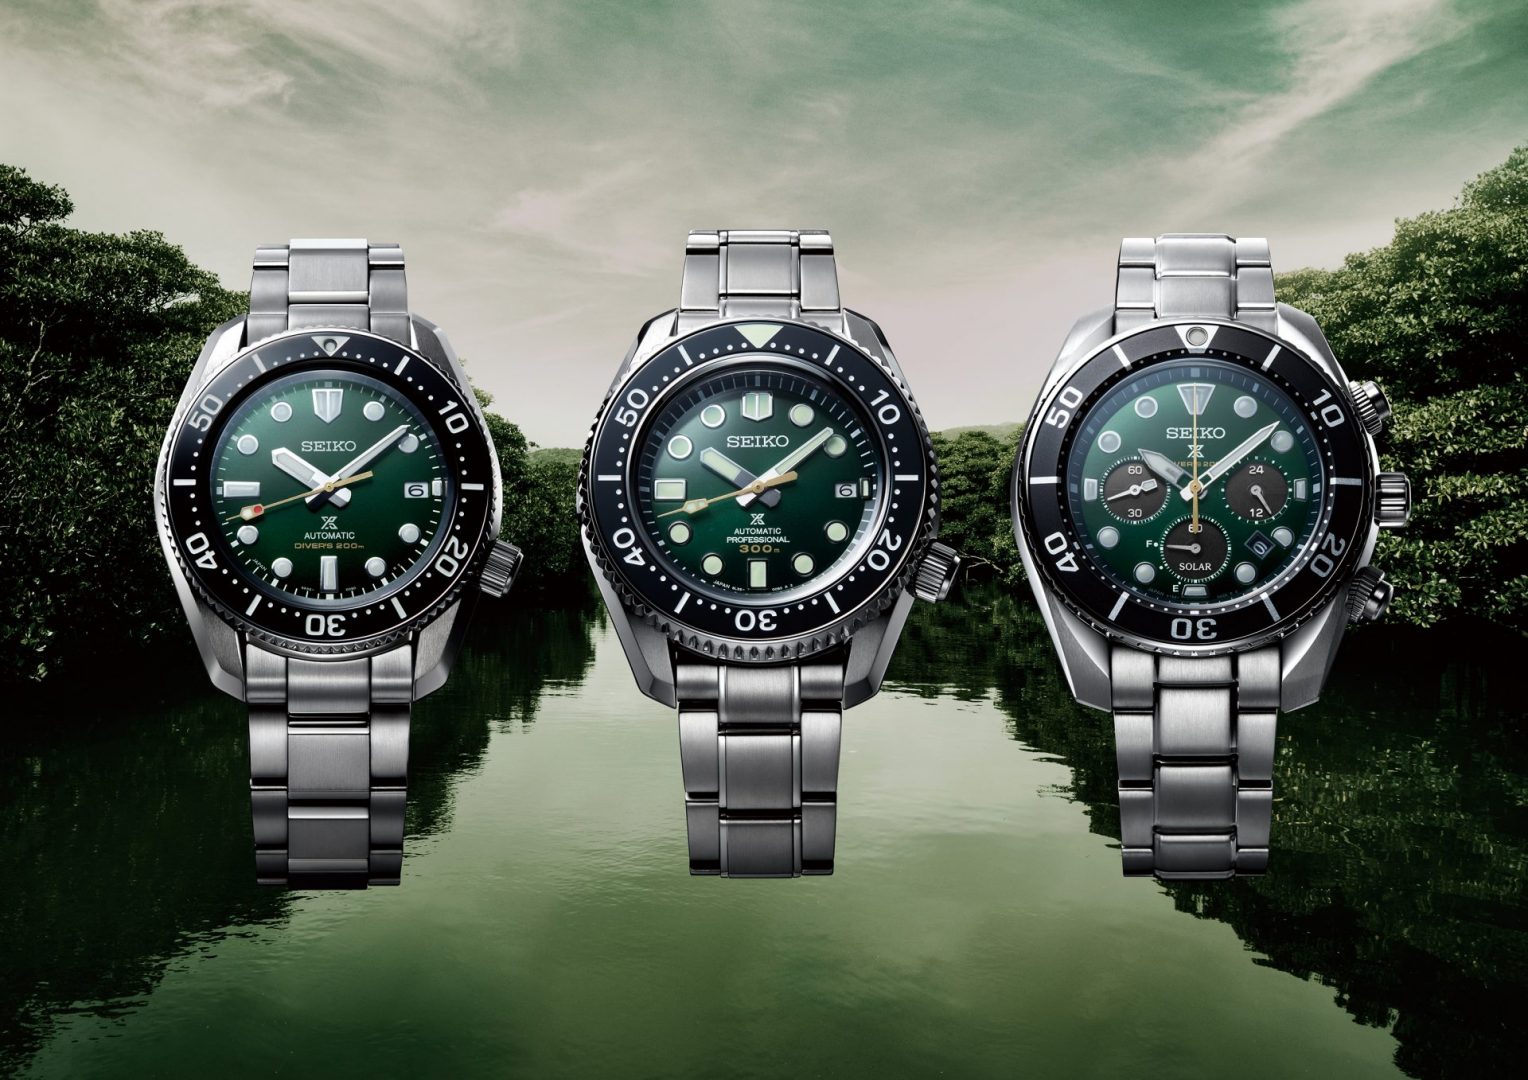 Seiko Celebrates 140 Years With These Limited Edition Watches